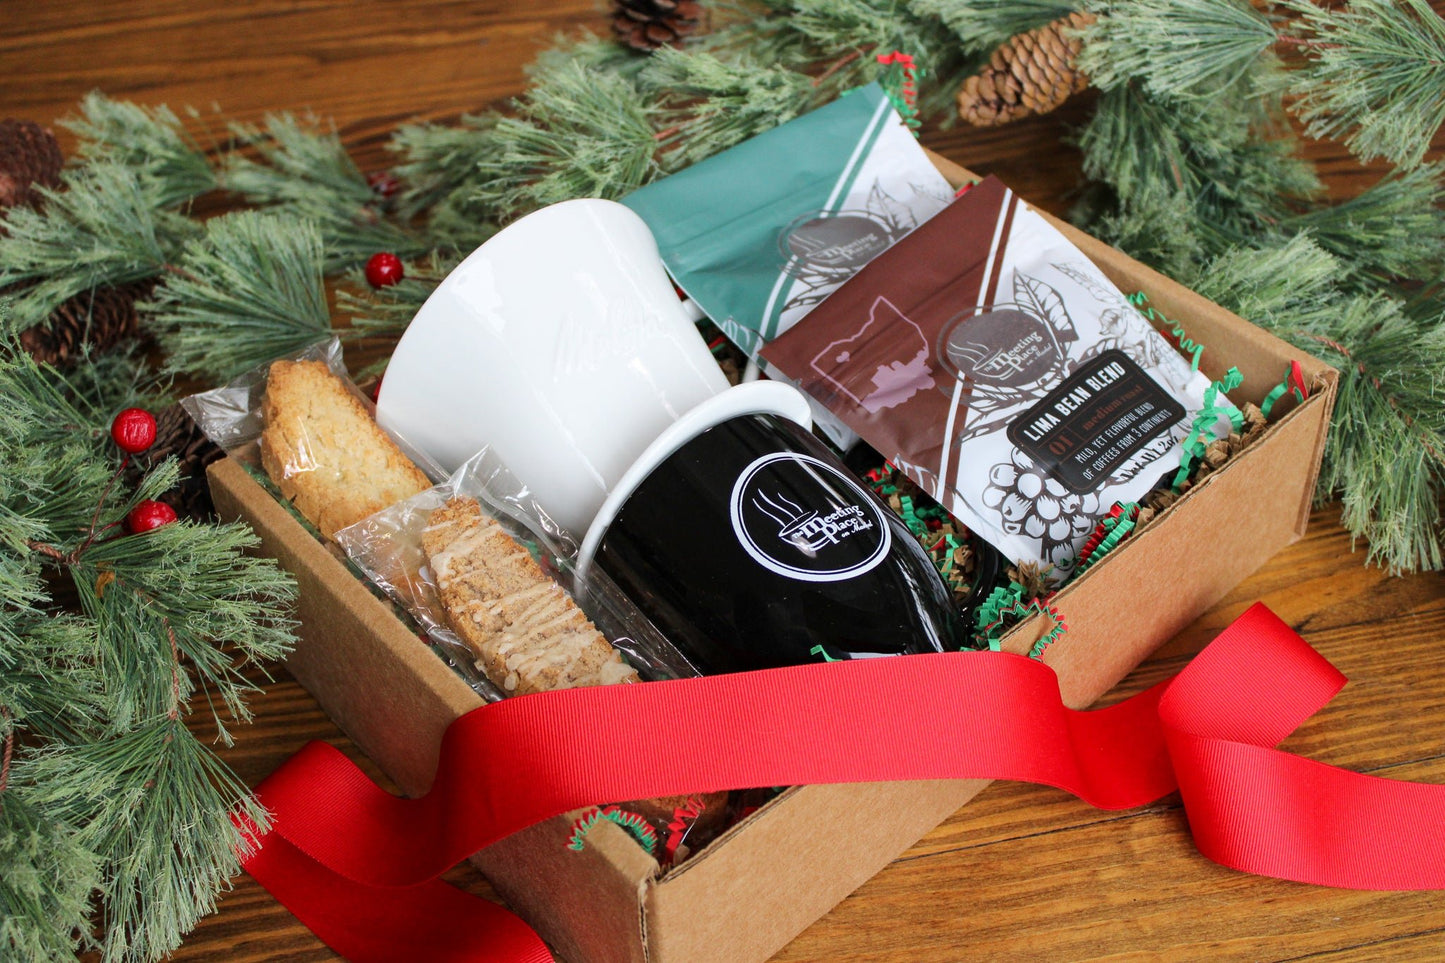 Pour-Over Coffee Lover Holiday Gift Box Christmas Gift Basket - The Meeting Place on Market